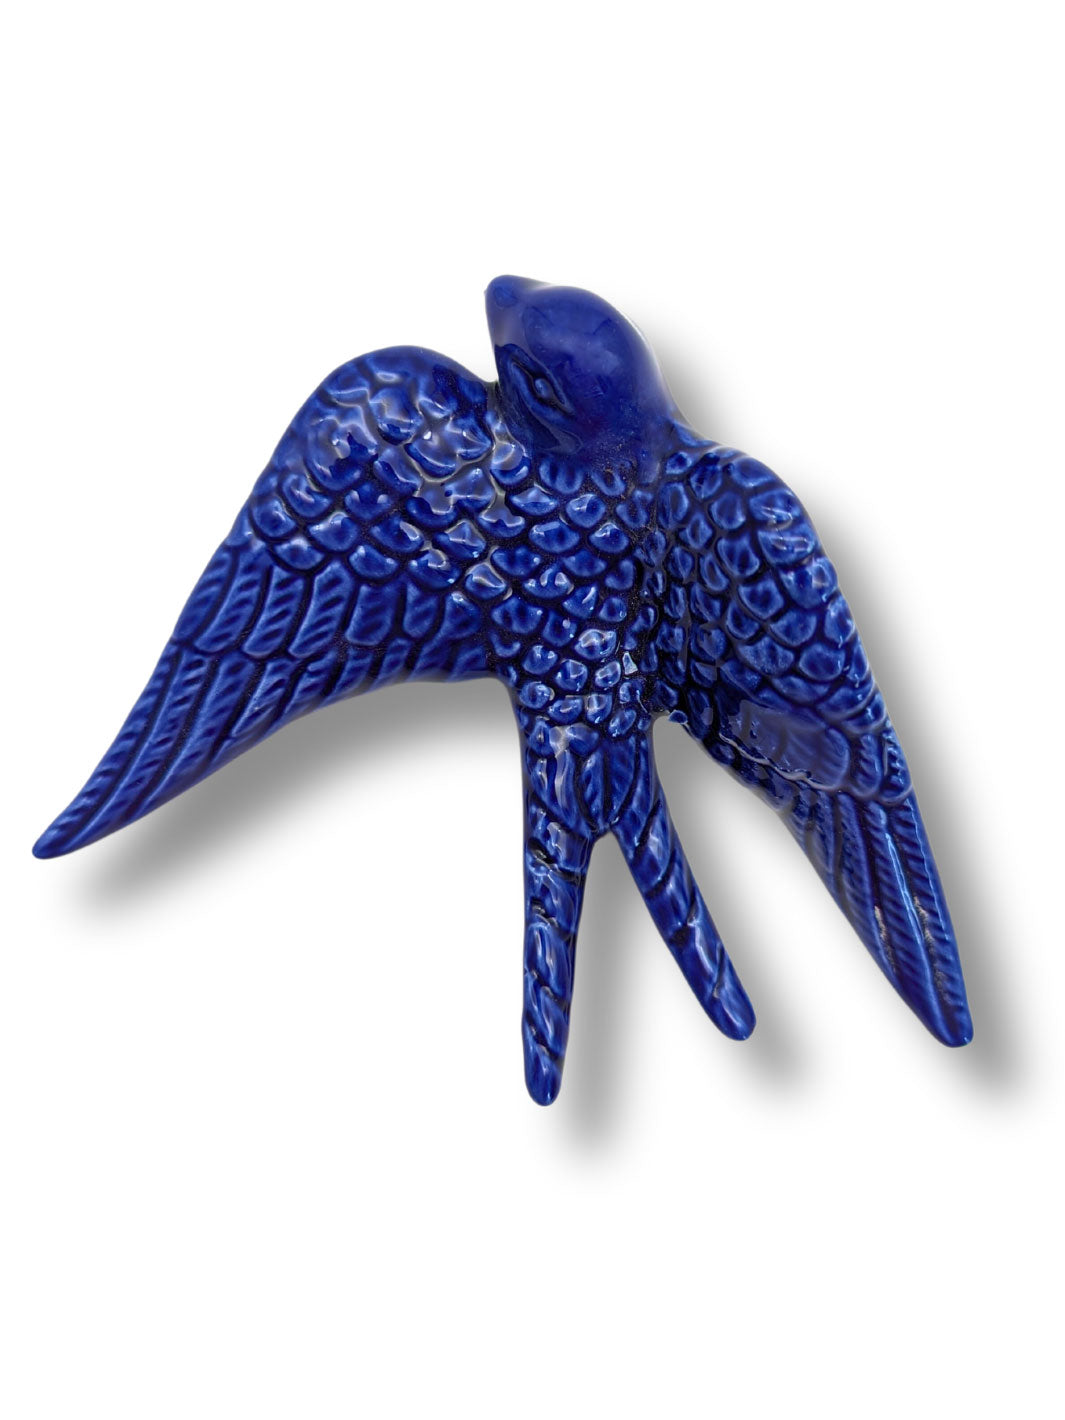 Hand Painted Large Ceramic Swallows for Home Décor - Various Colors Blue